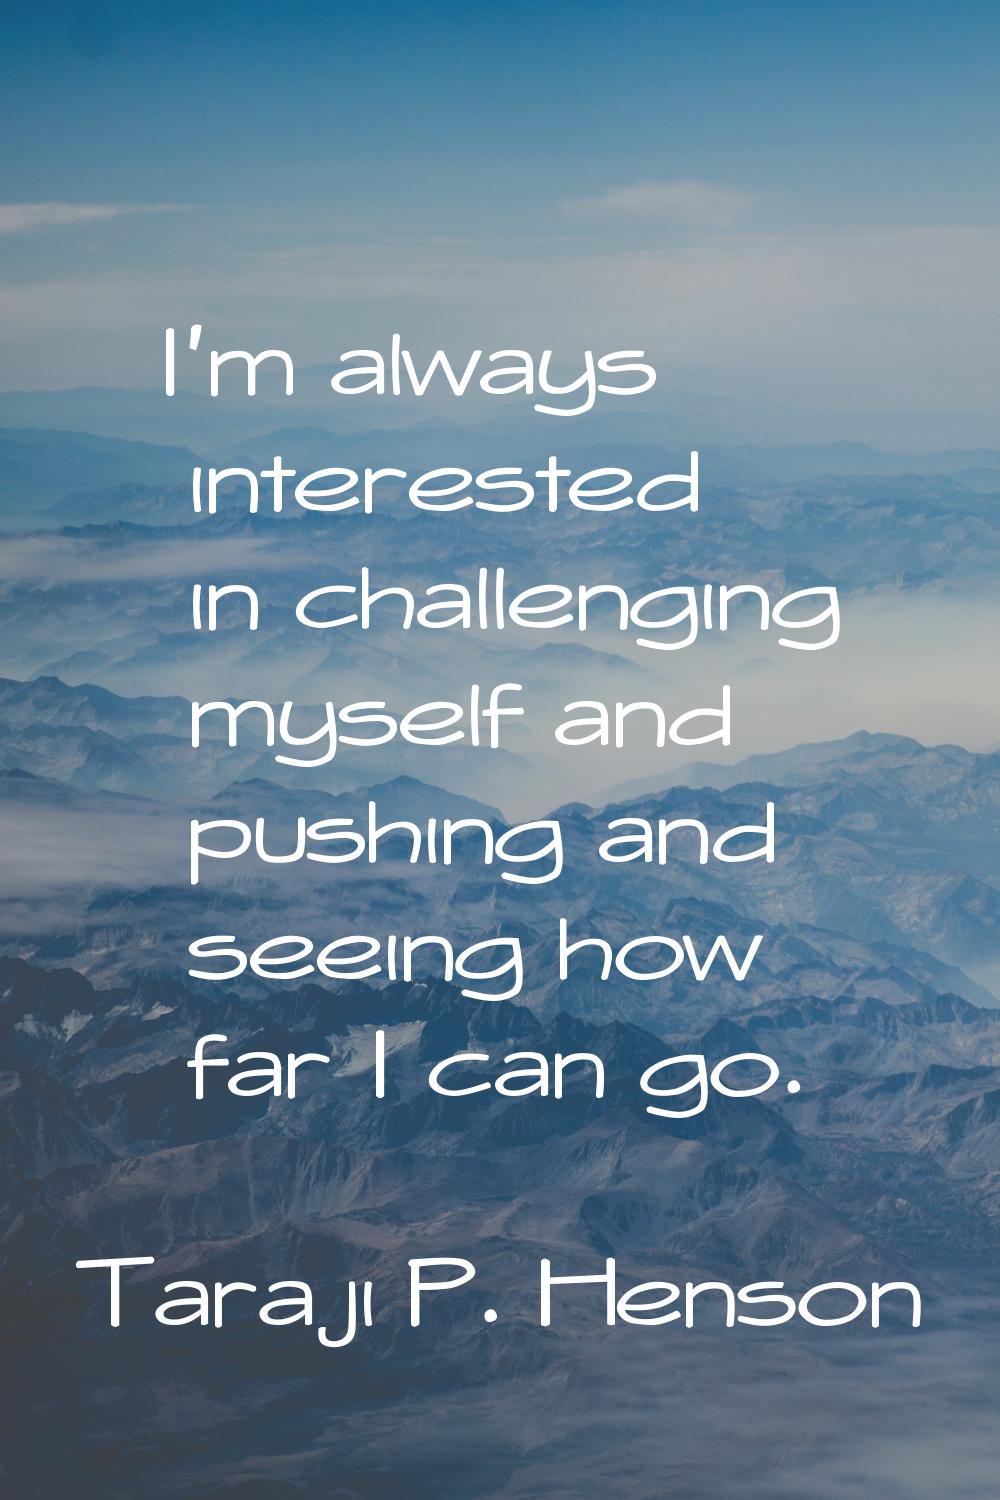 I'm always interested in challenging myself and pushing and seeing how far I can go.